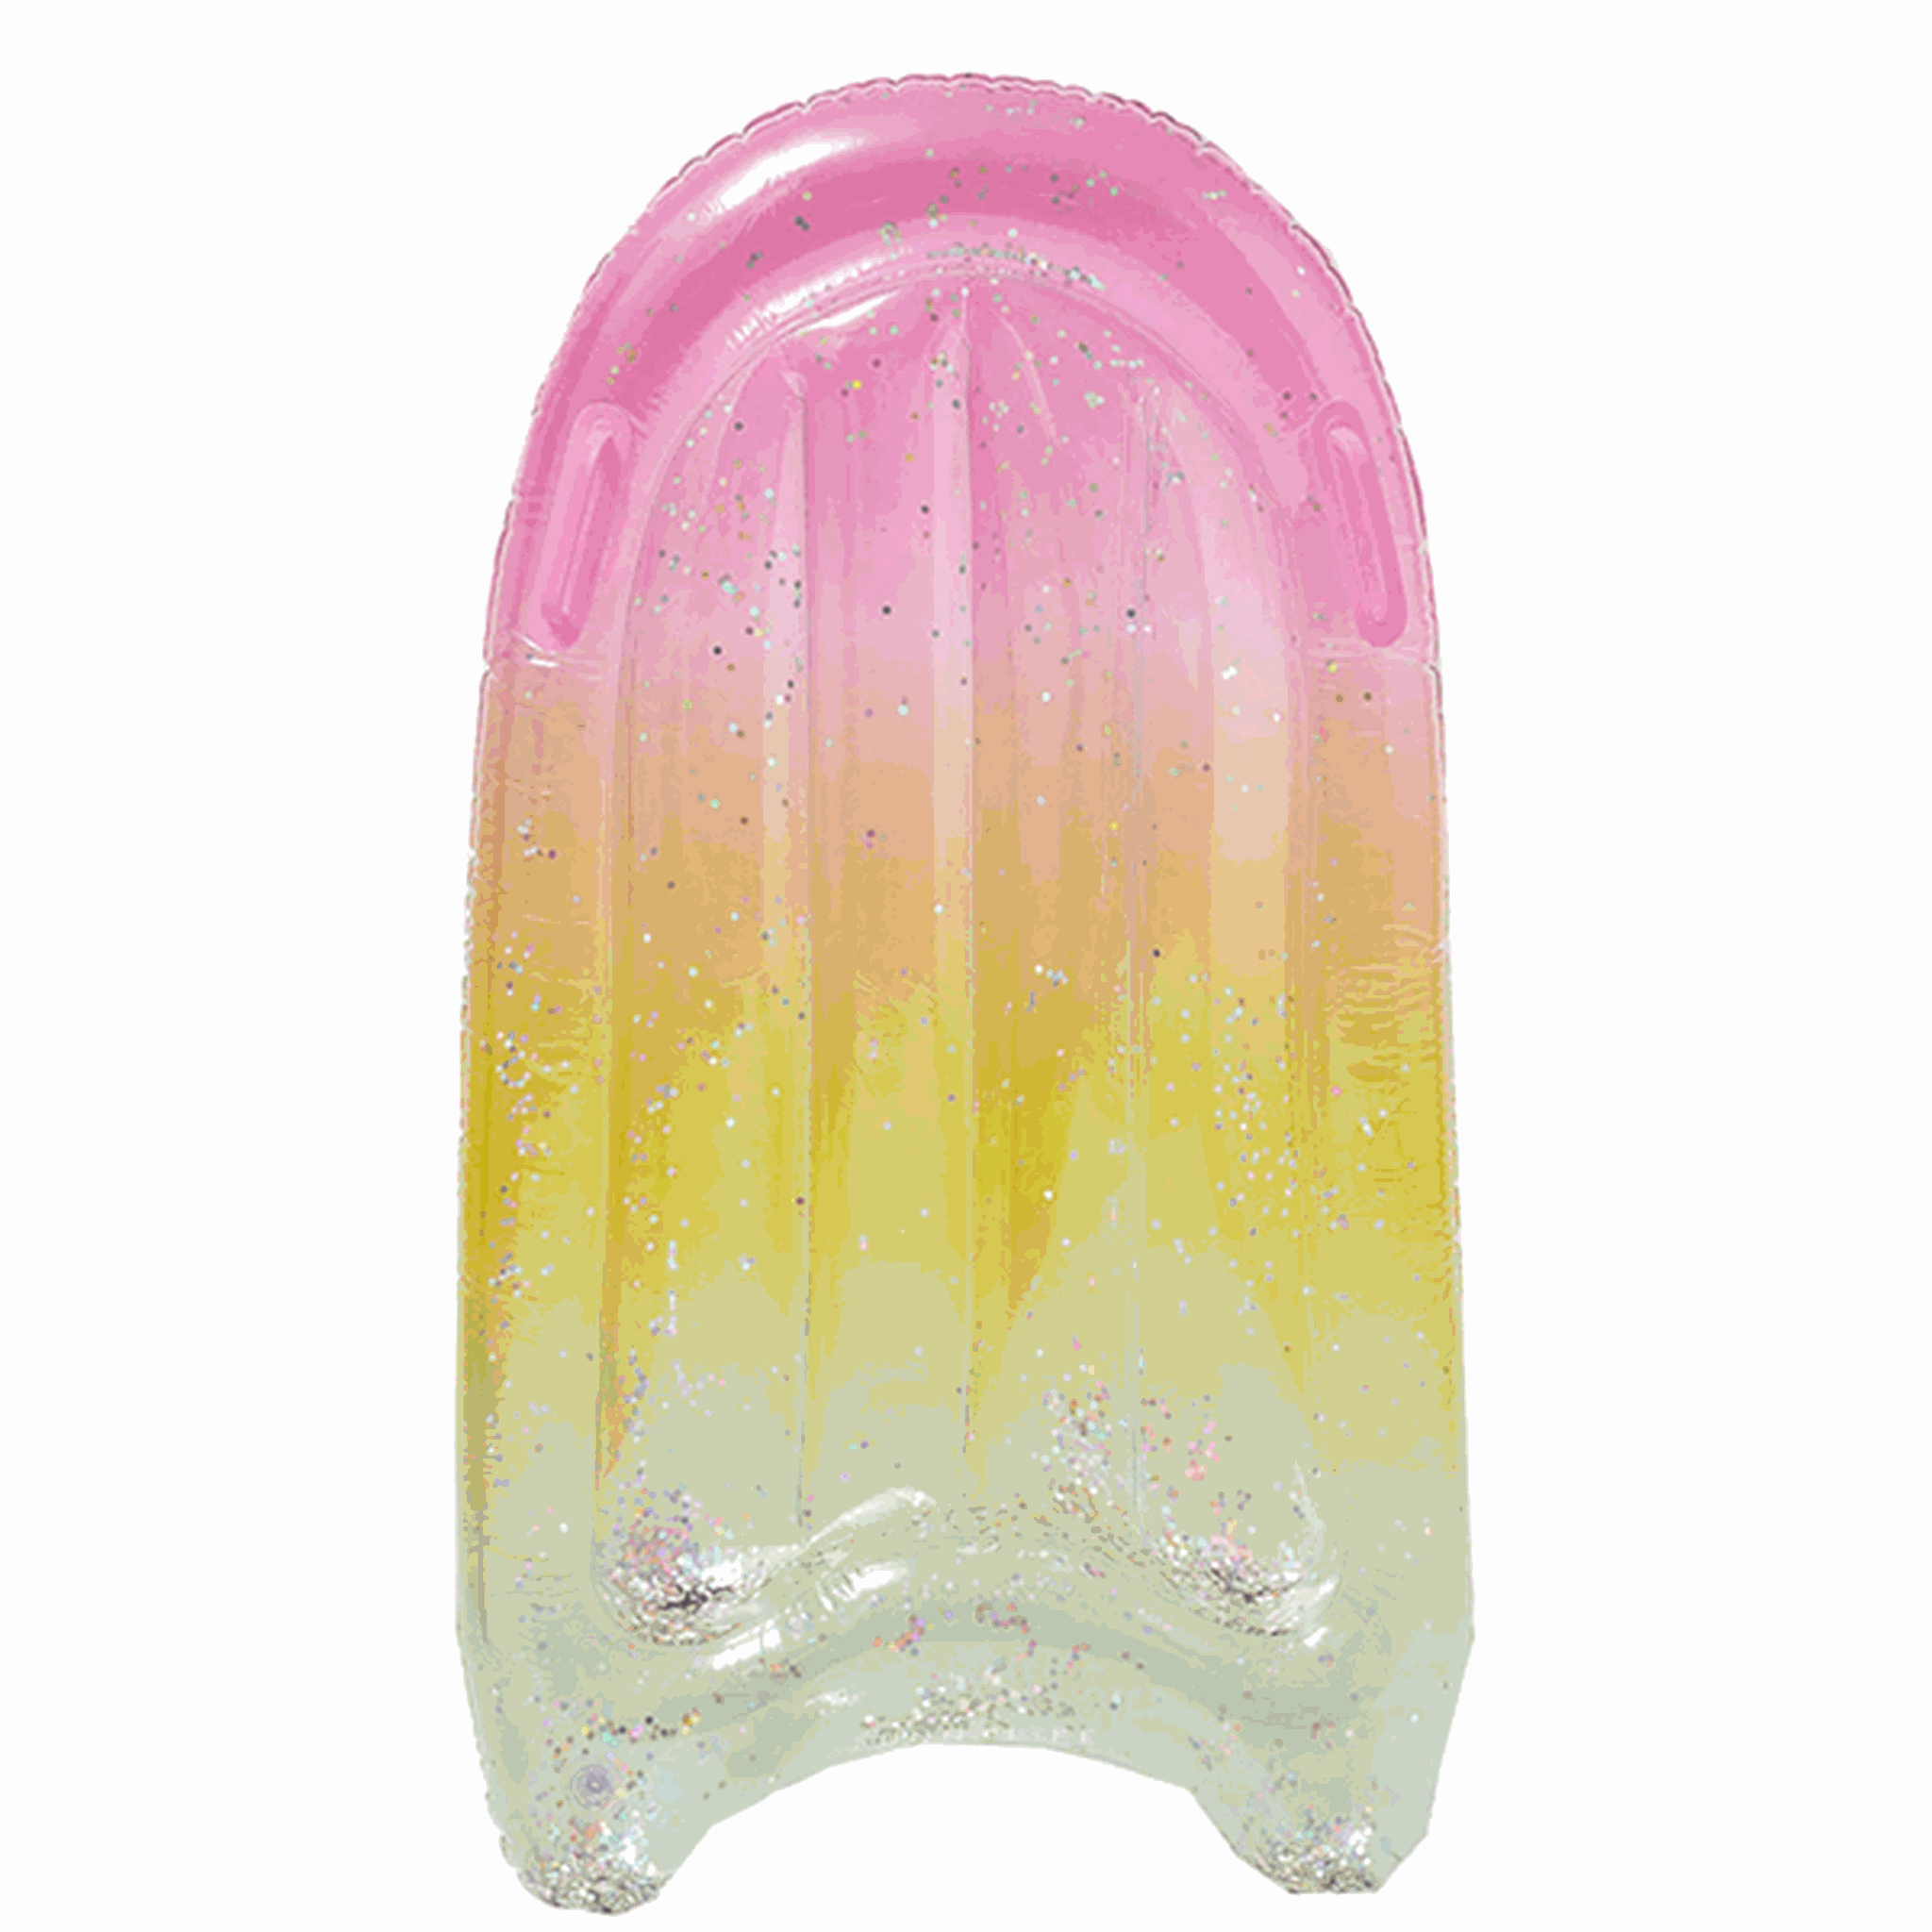 SunnyLife Inflatable Boogie Board Rainbow Ombre